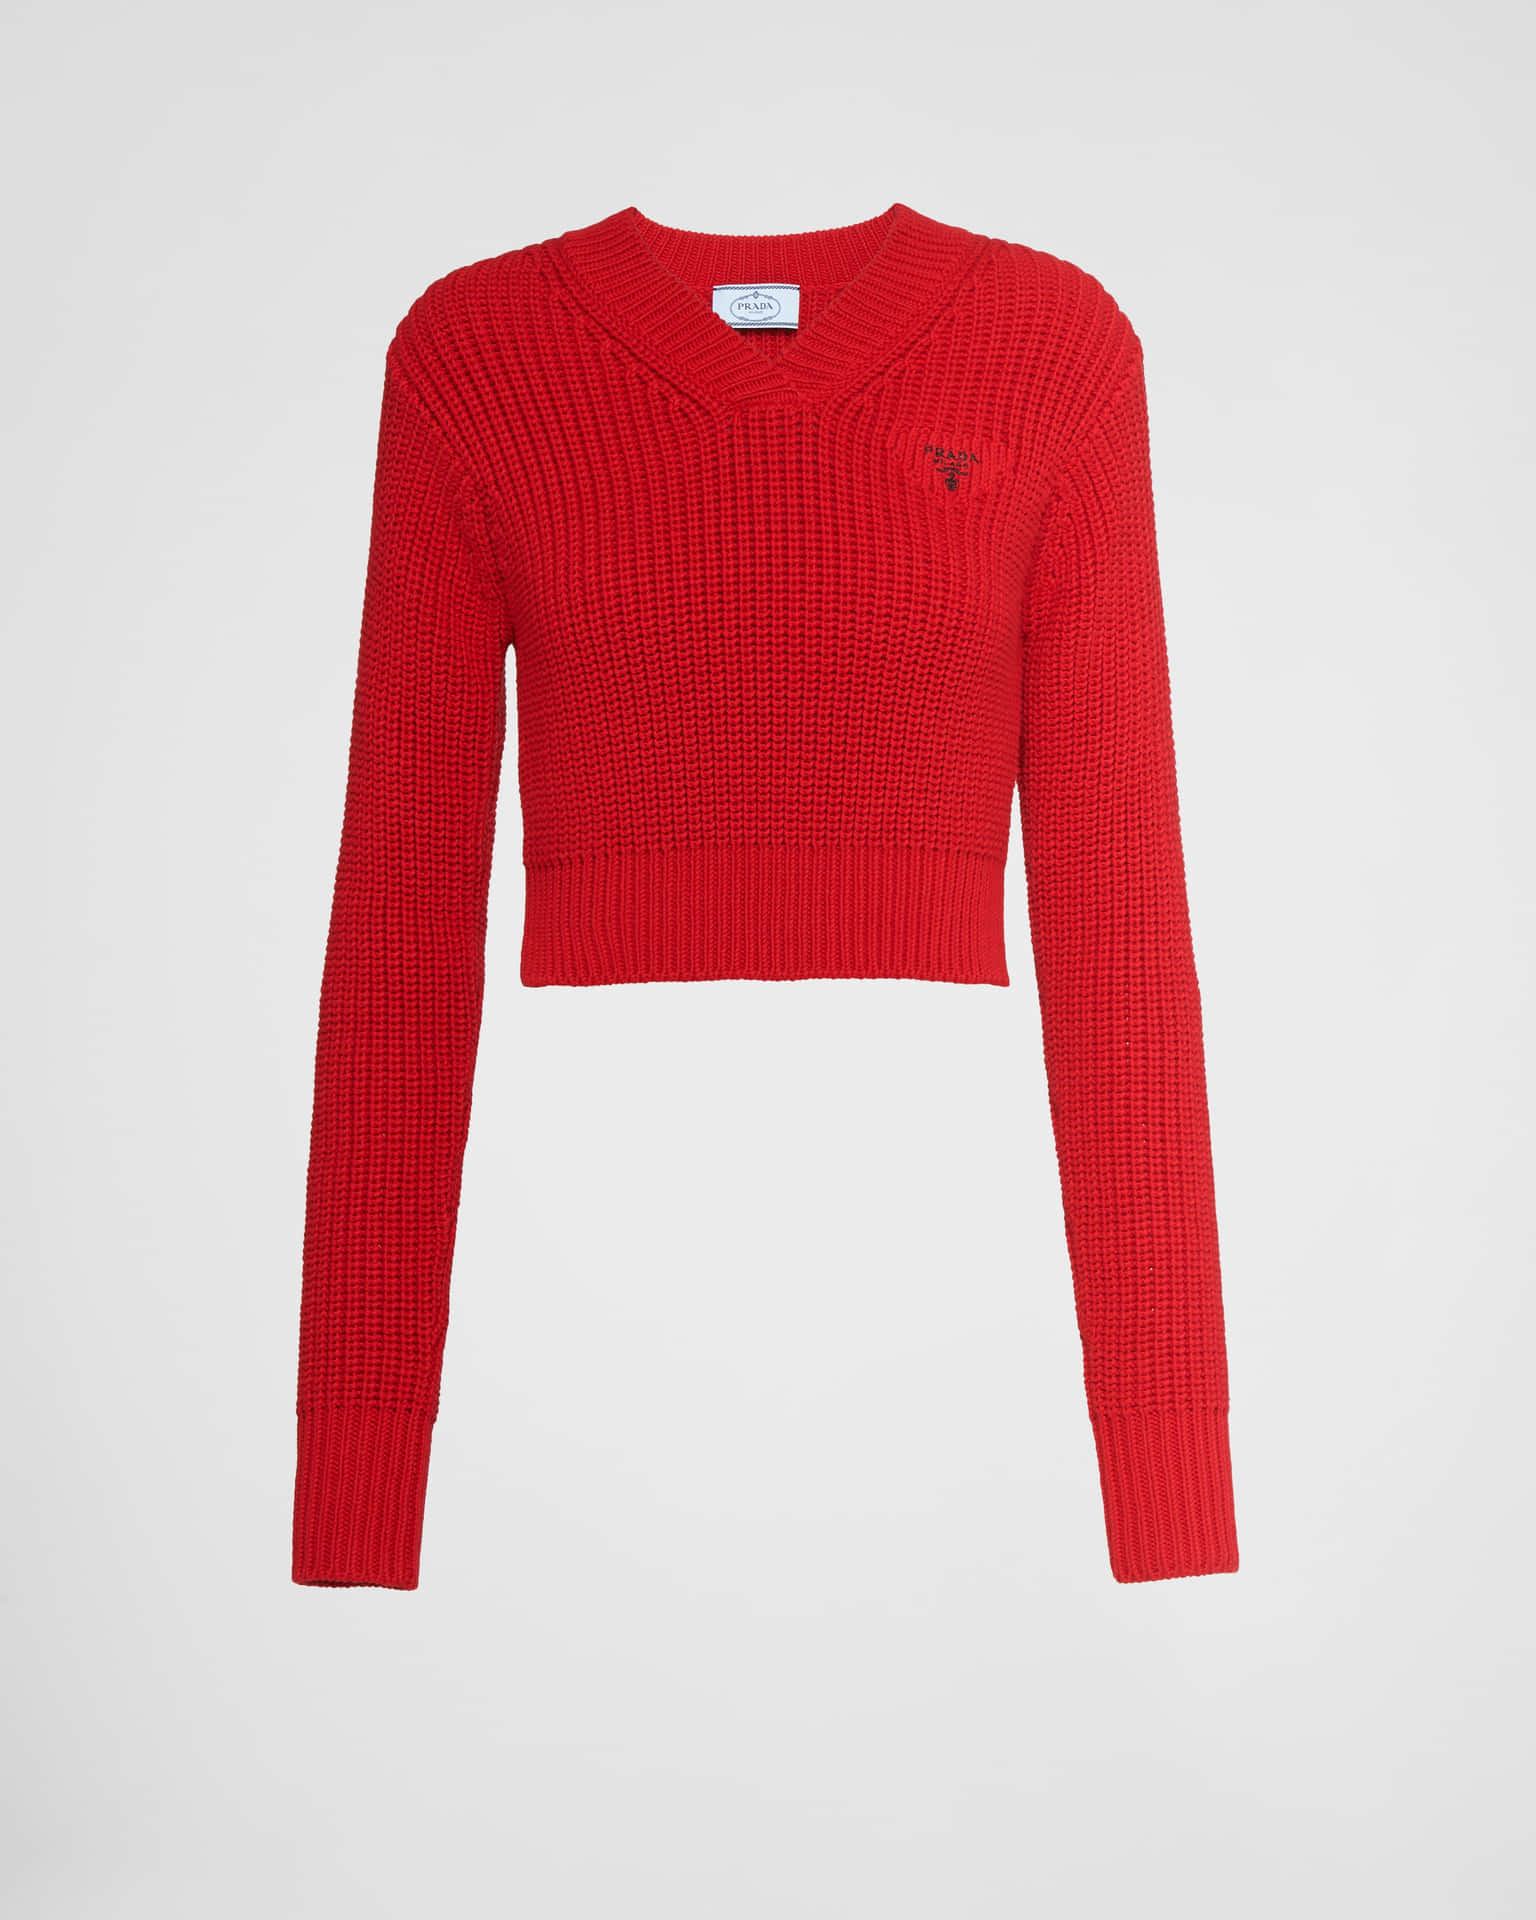 Stylish red sweater on a hanger Wallpaper